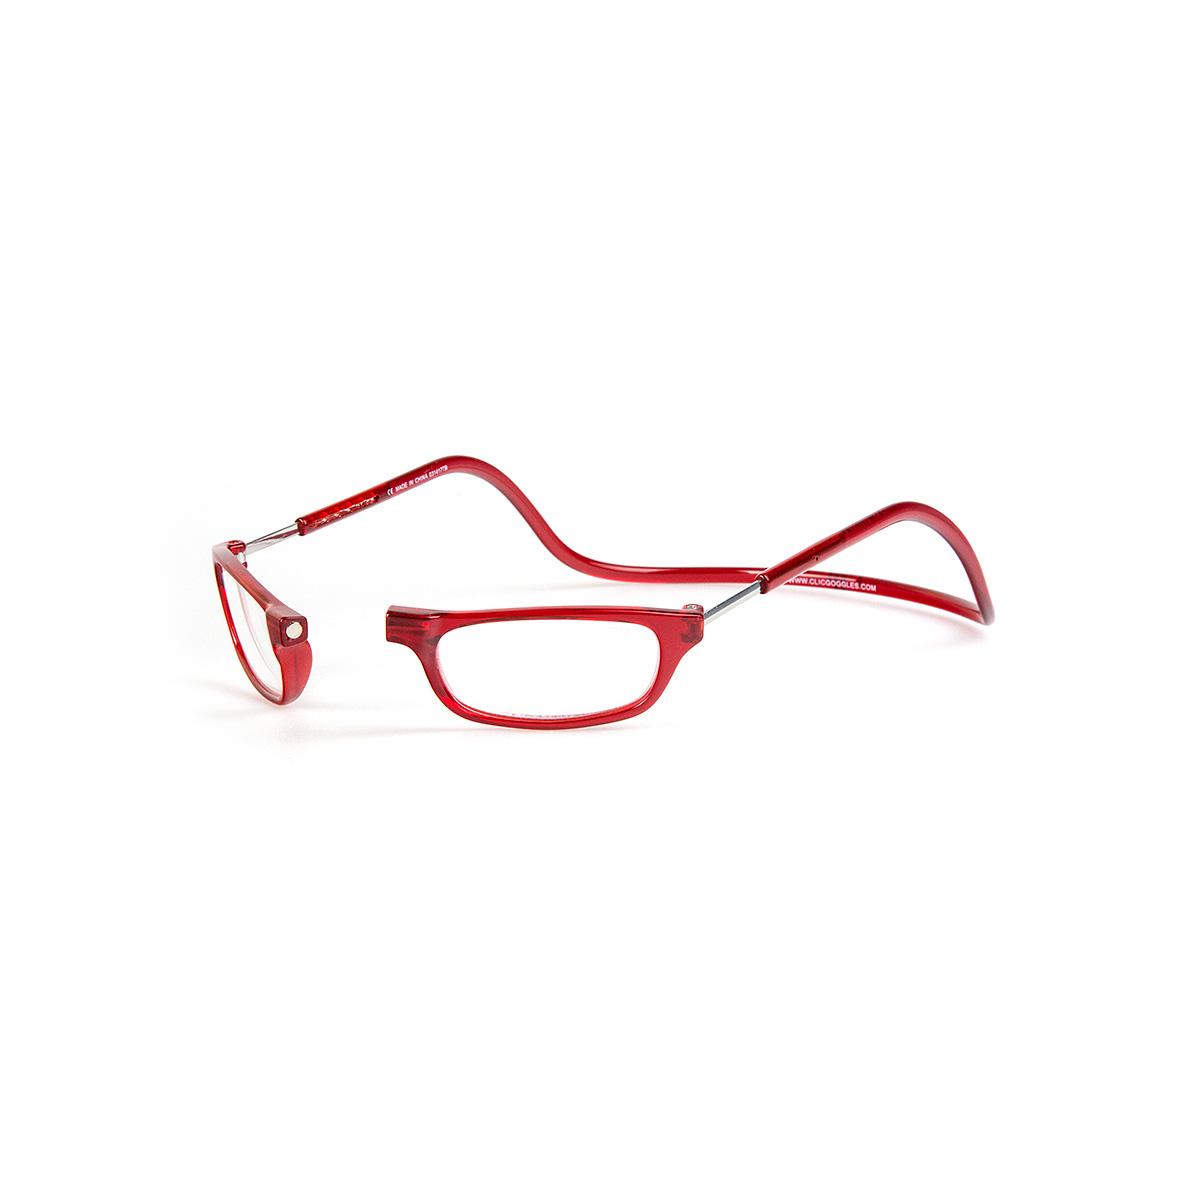 Clic Reading Glasses - Red